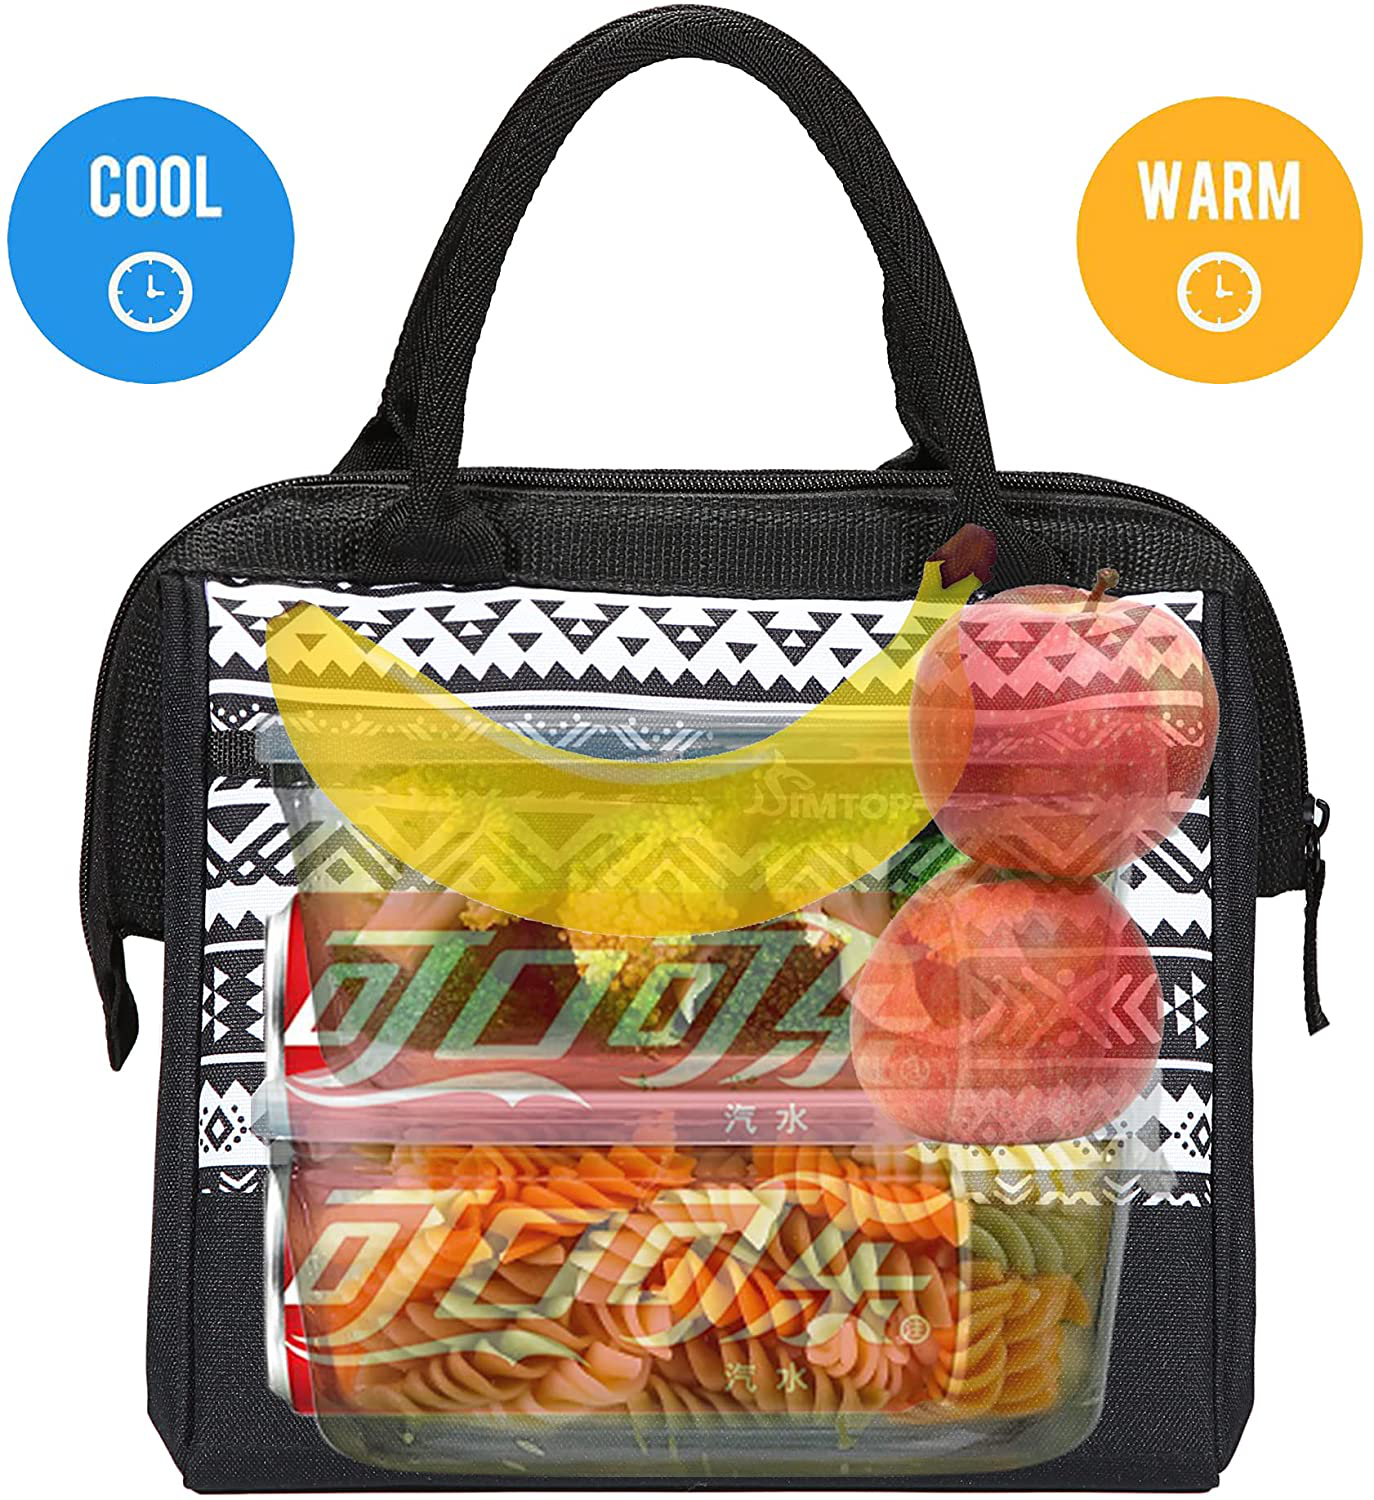 Insulated Lunch Bag, SIMTOP Cooler Tote Bag for Women/Men/Kids/Students, Cute Design, Leakproof, Easy Clean, Roomy Space Fit for Lunch Container Box, Utensils, Snacks, Drinks, Fruits, Wide-Open